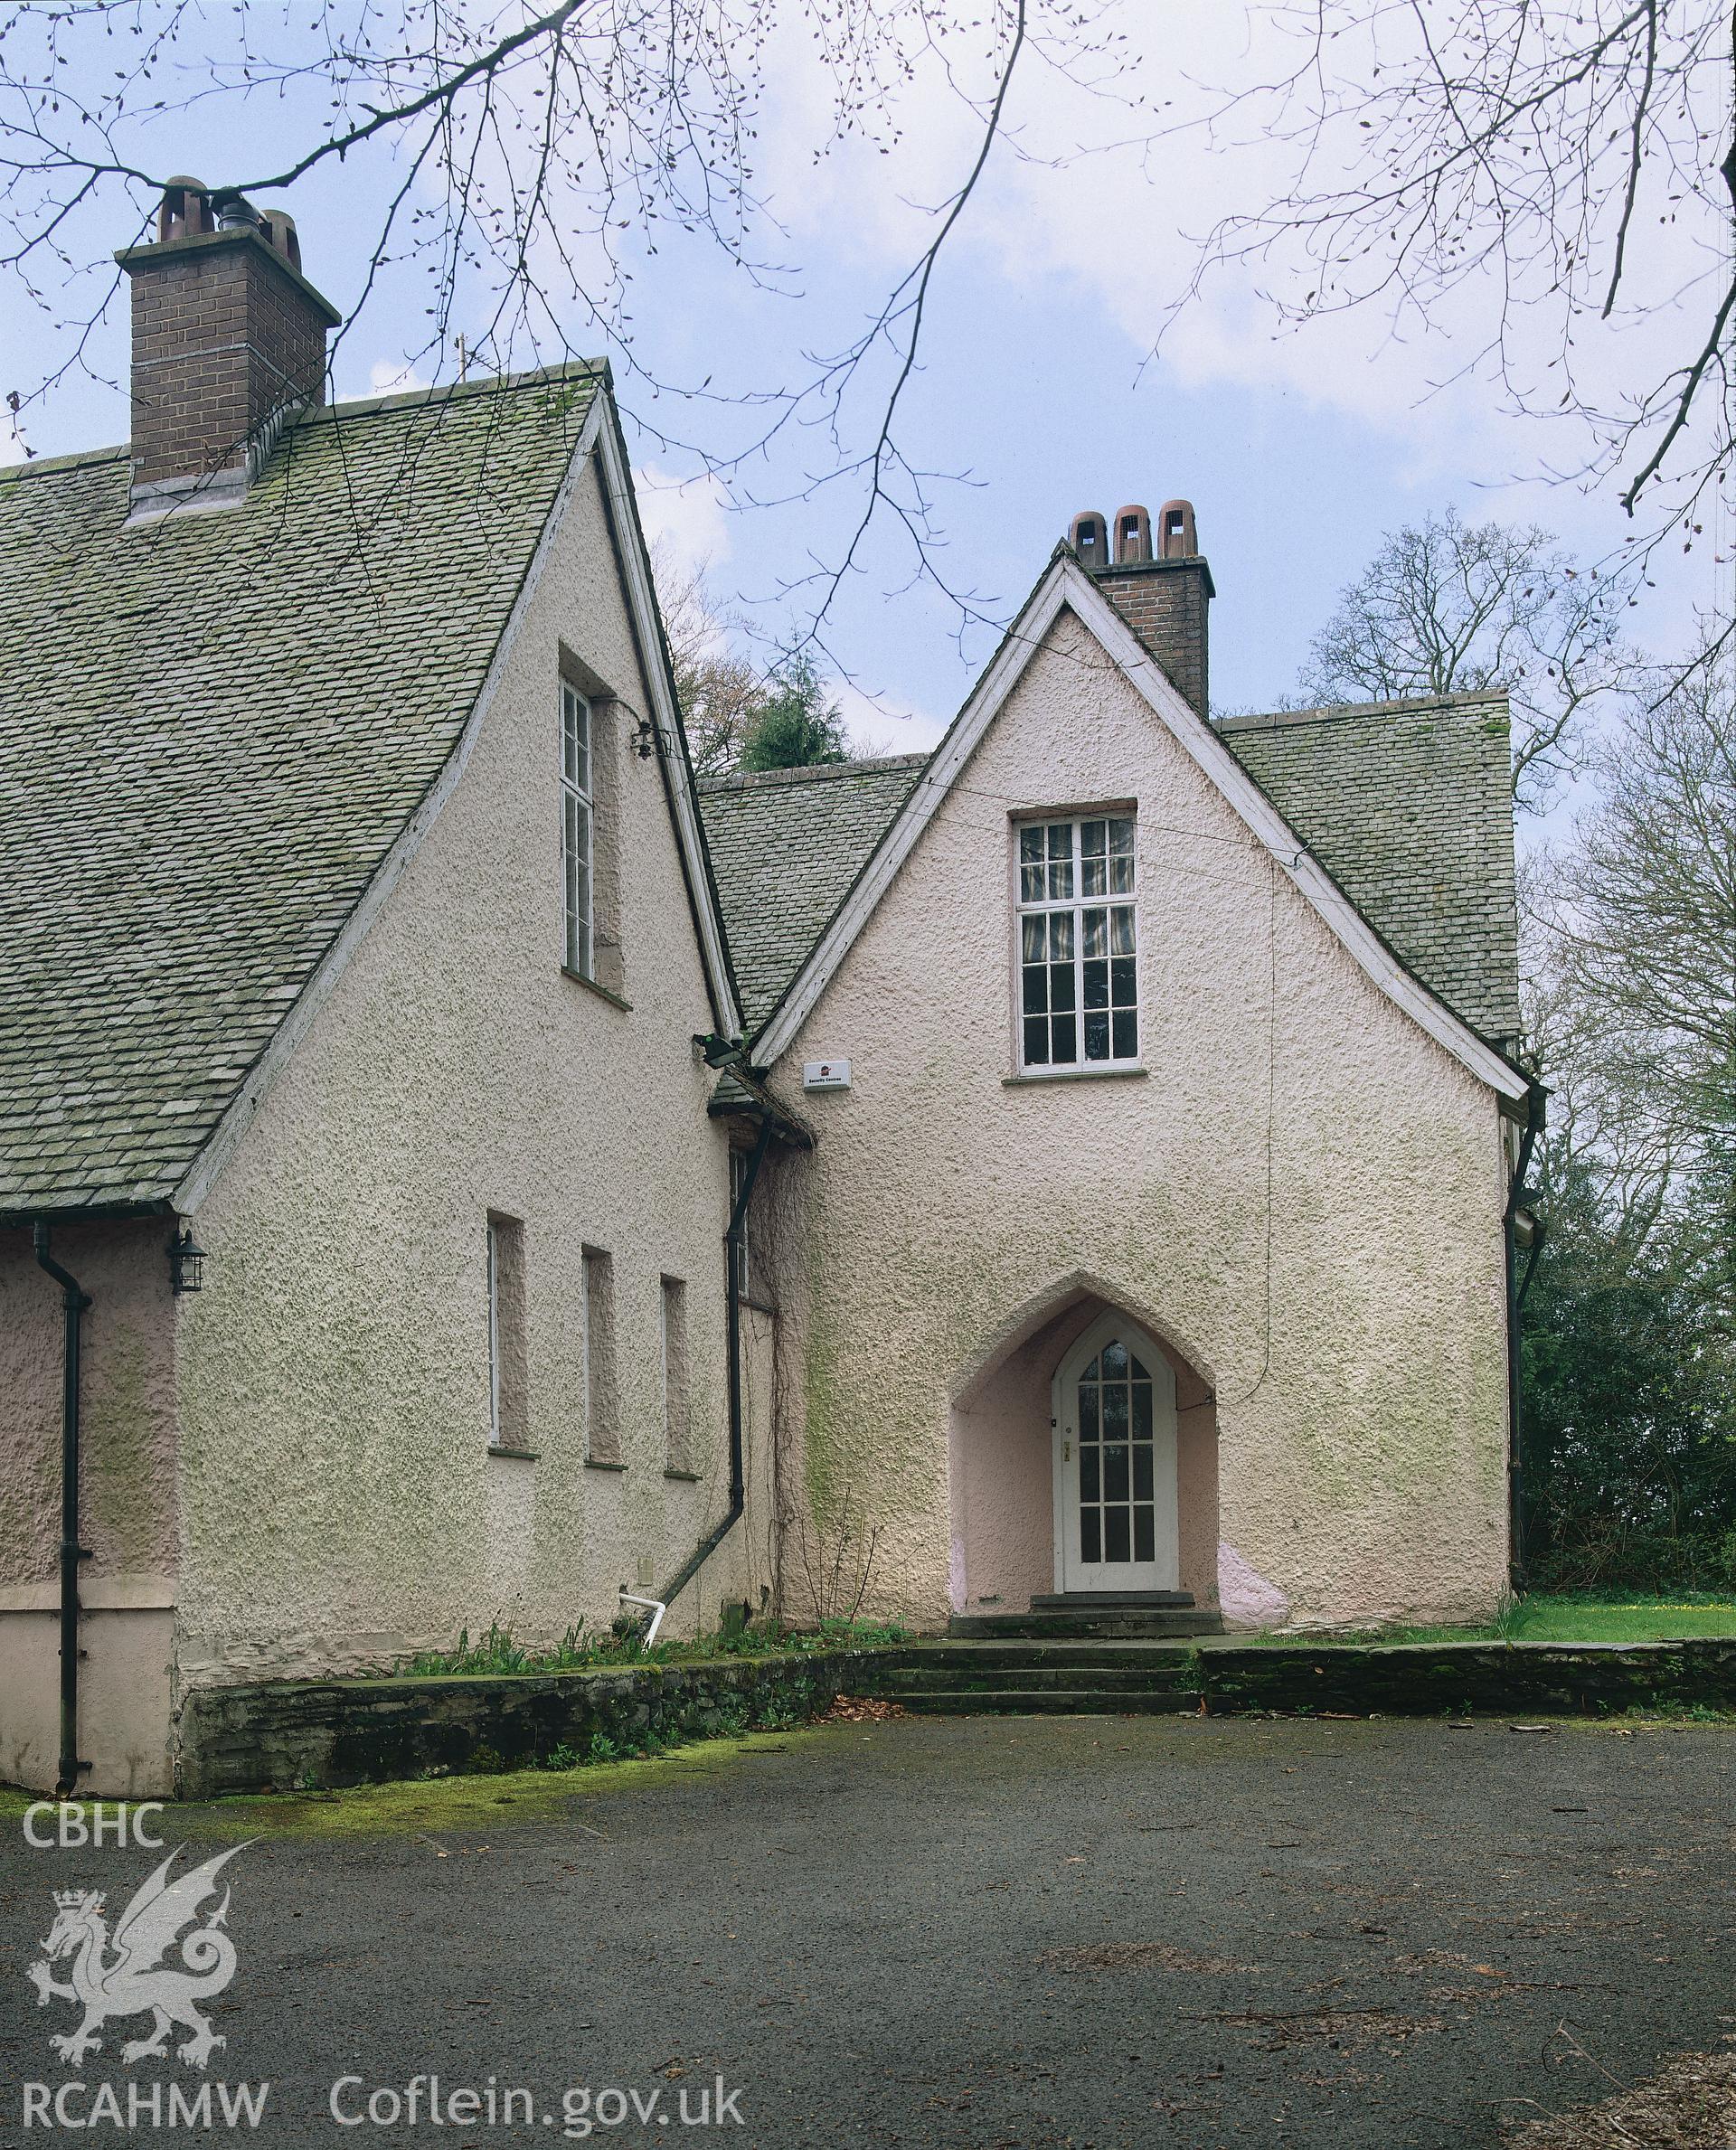 RCAHMW colour transparency showing exterior view of the Vicarage, Llanybydder